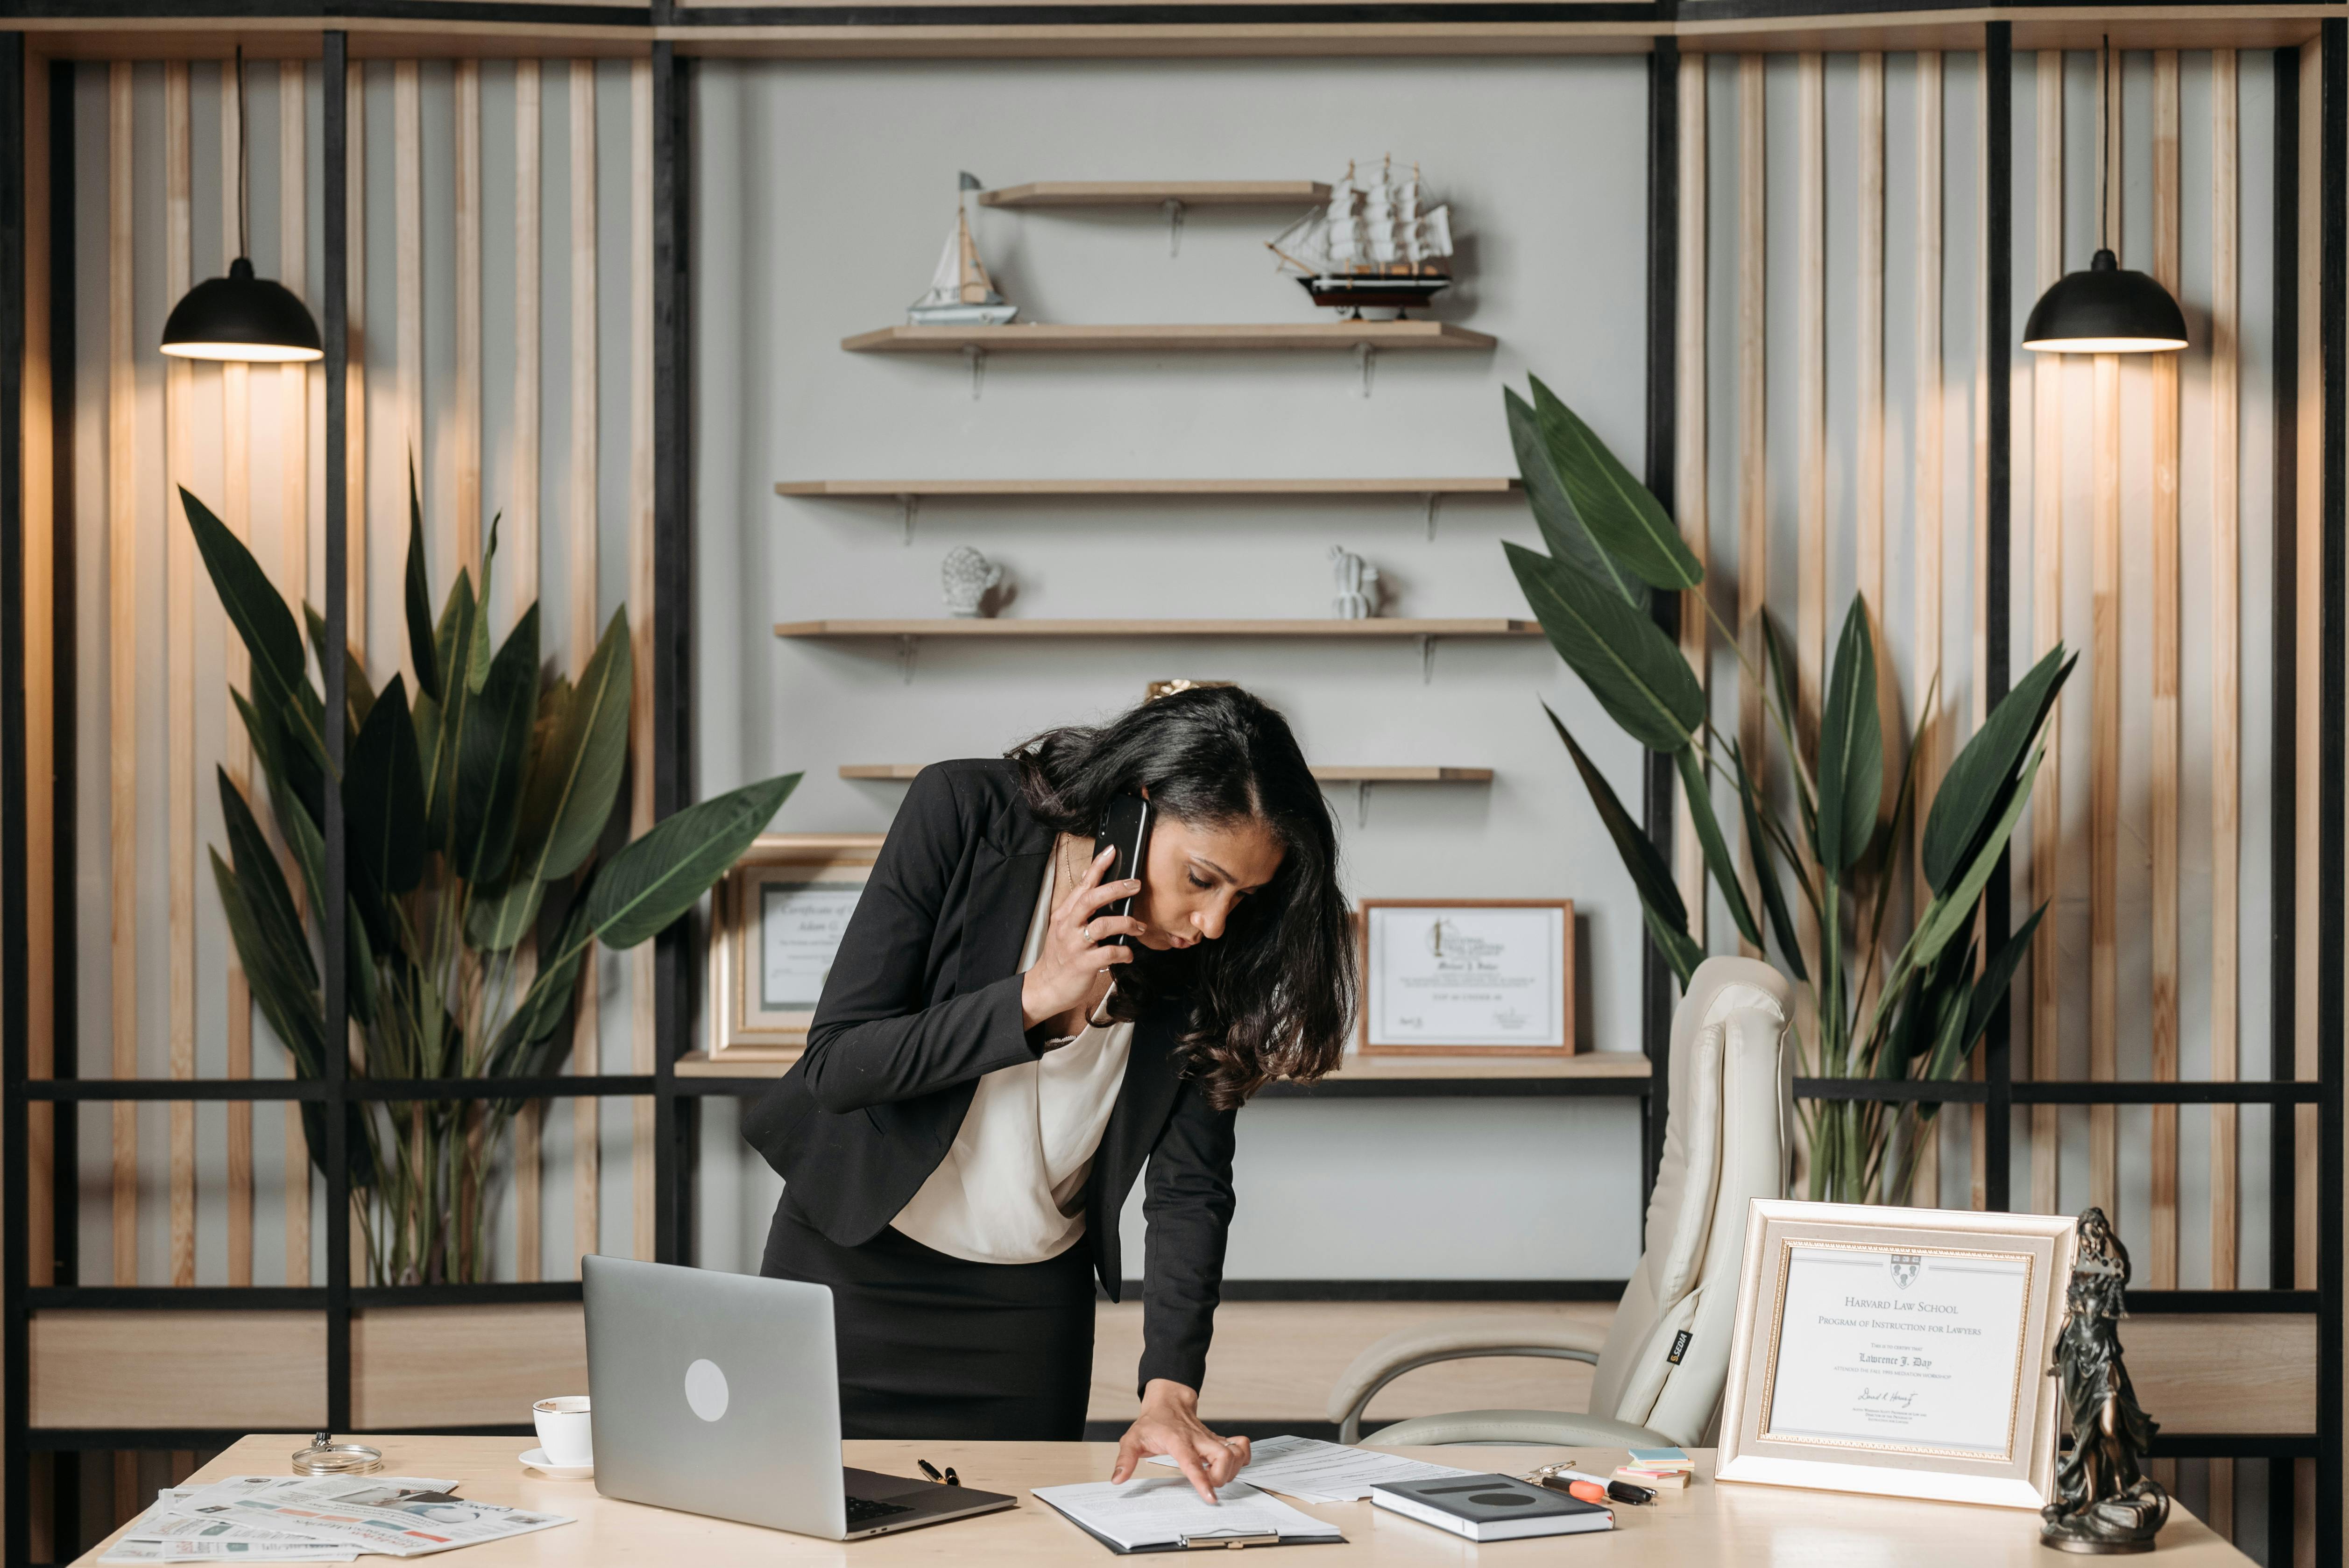 A busy female lawyer | Source: Pexels